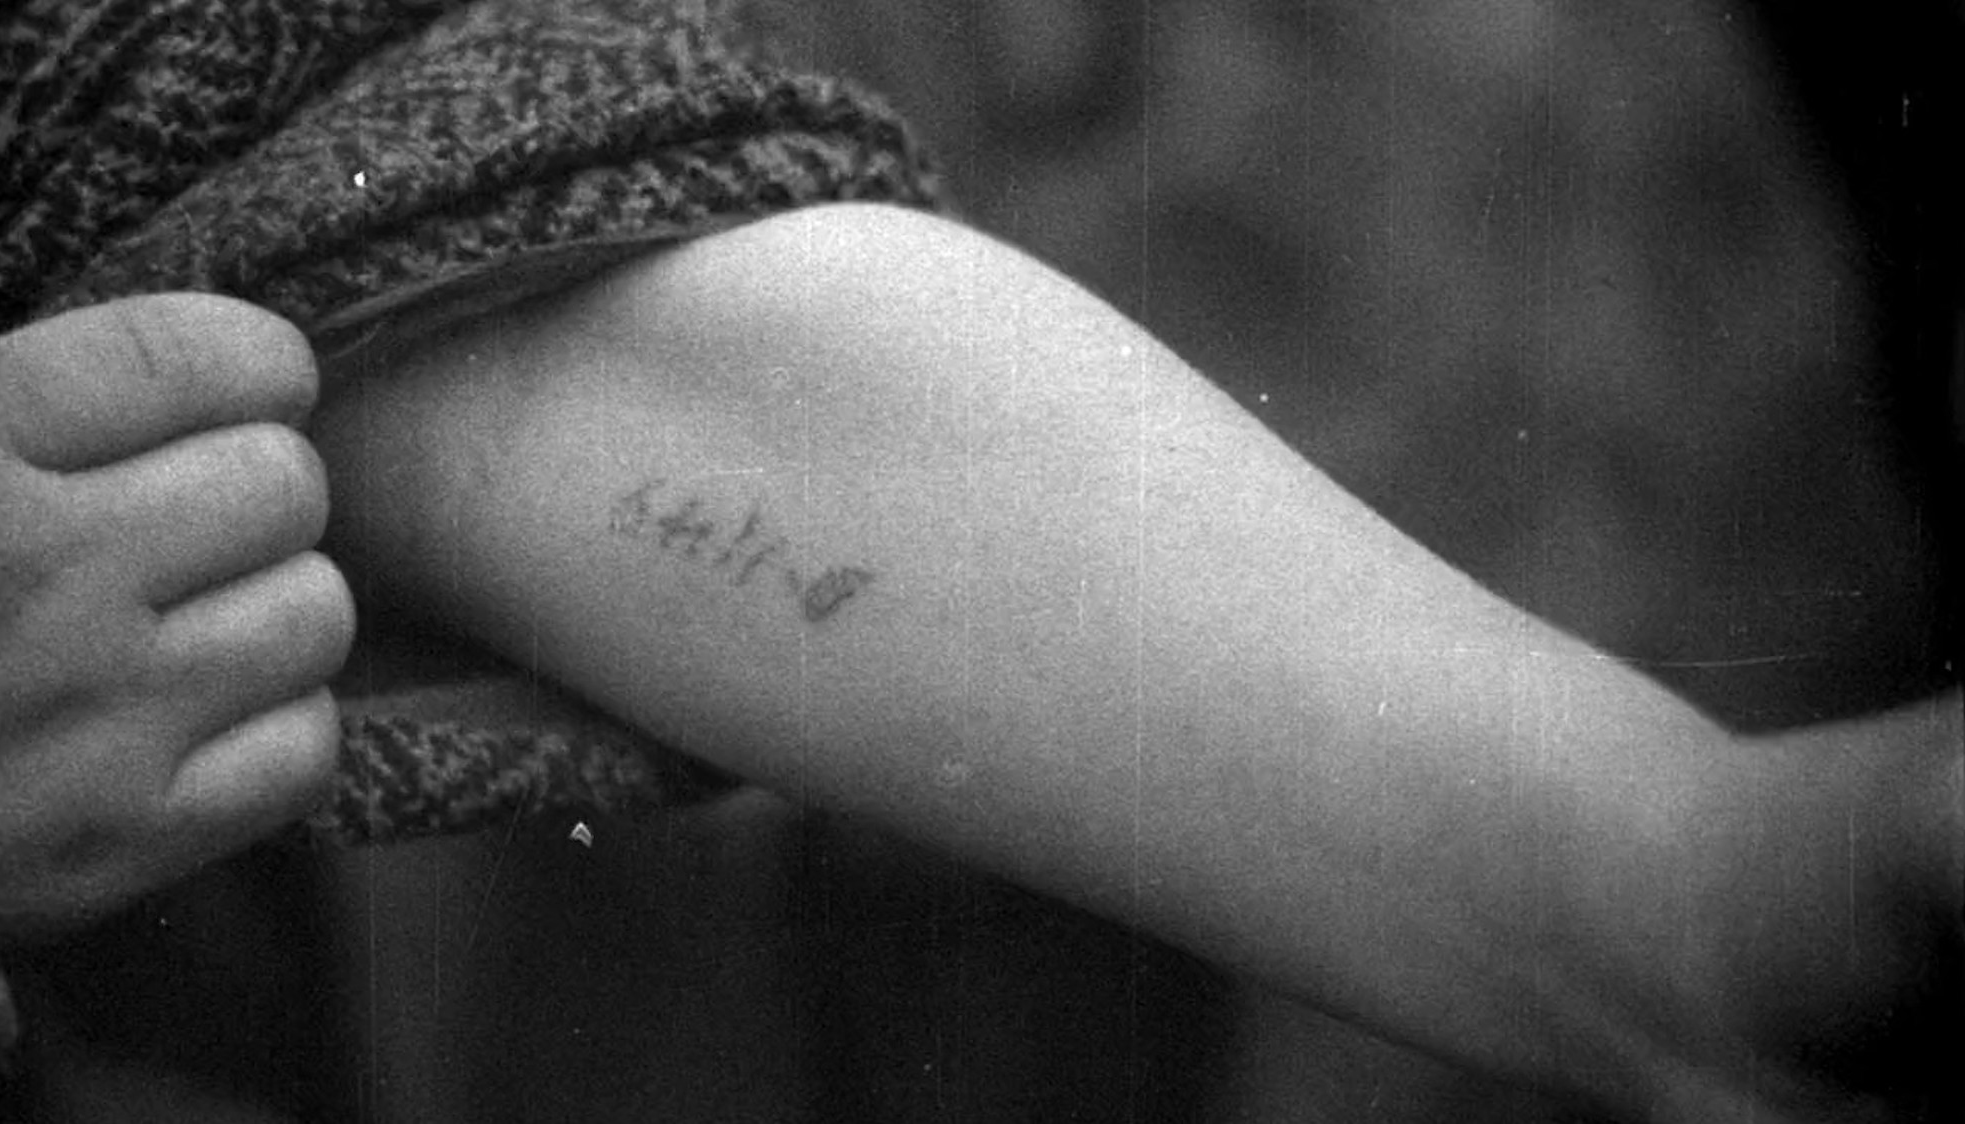 The Auschwitz Tattoo in Visual Memory | Drupal